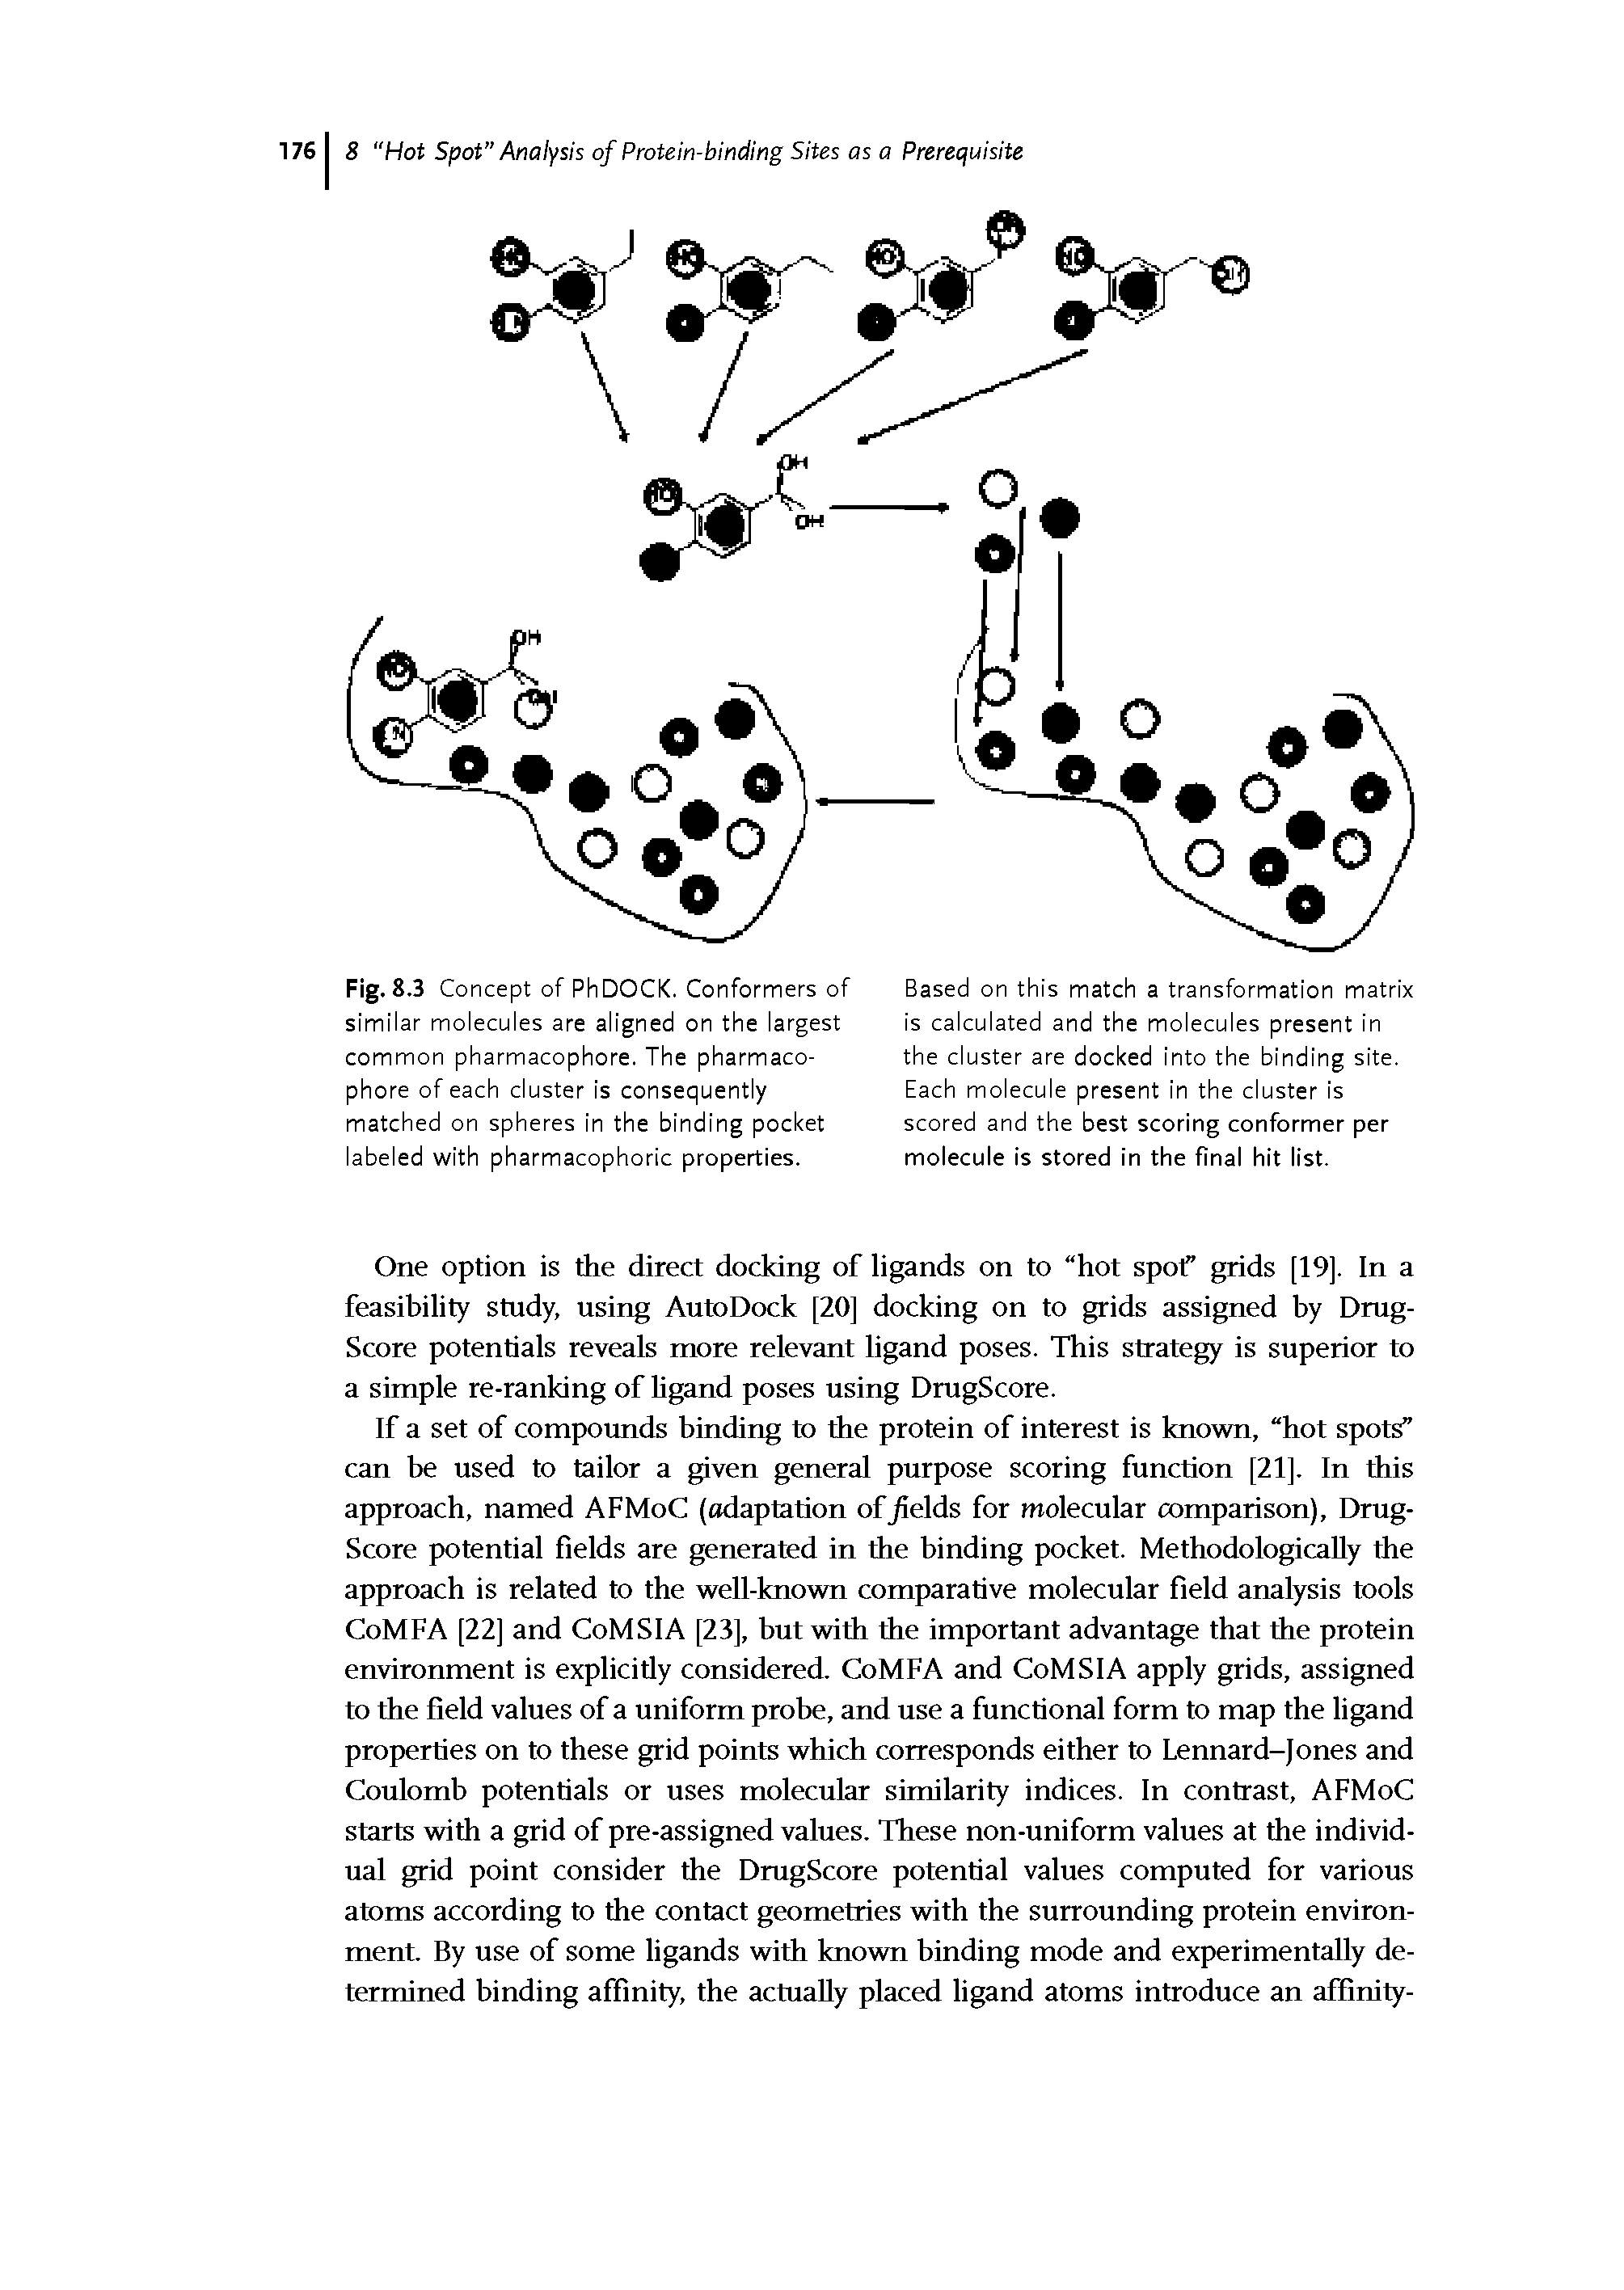 Fig. 8.3 Concept of PhDOCK. Conformers of similar molecules are aligned on the largest common pharmacophore. The pharmacophore of each cluster is consequently matched on spheres in the binding pocket labeled with pharmacophoric properties.